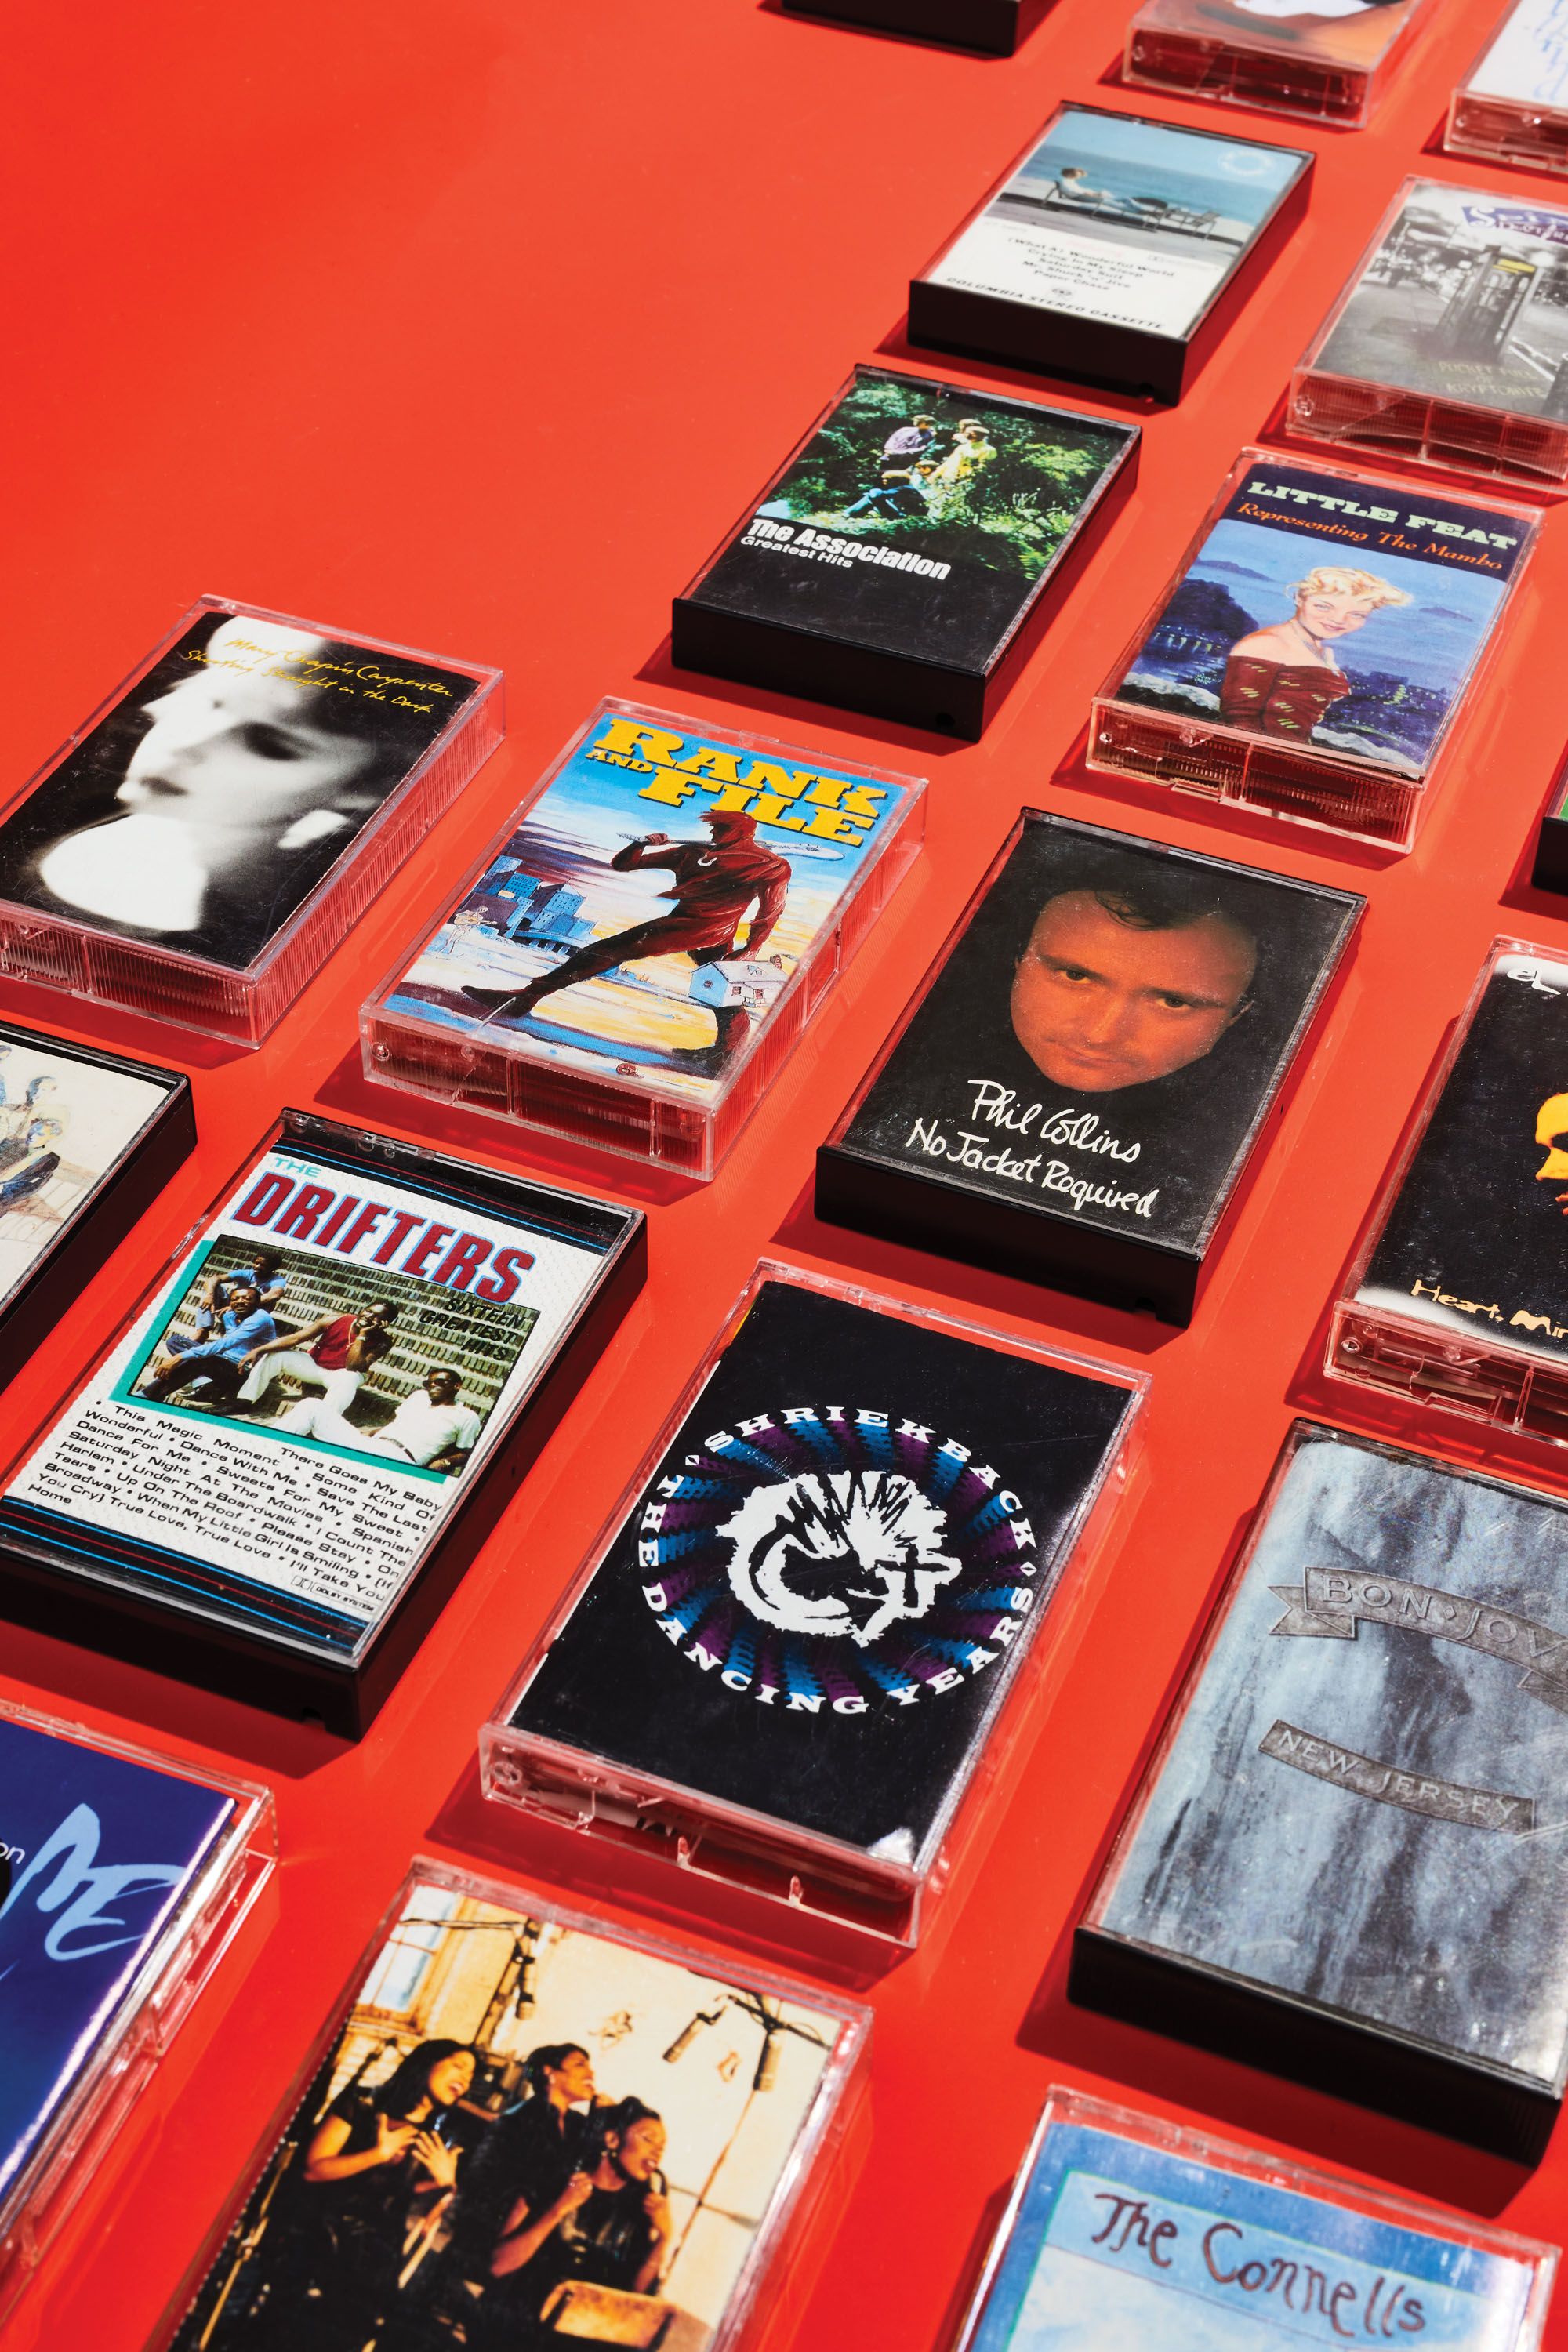 Classic Cassette Tapes Are Making a Comeback